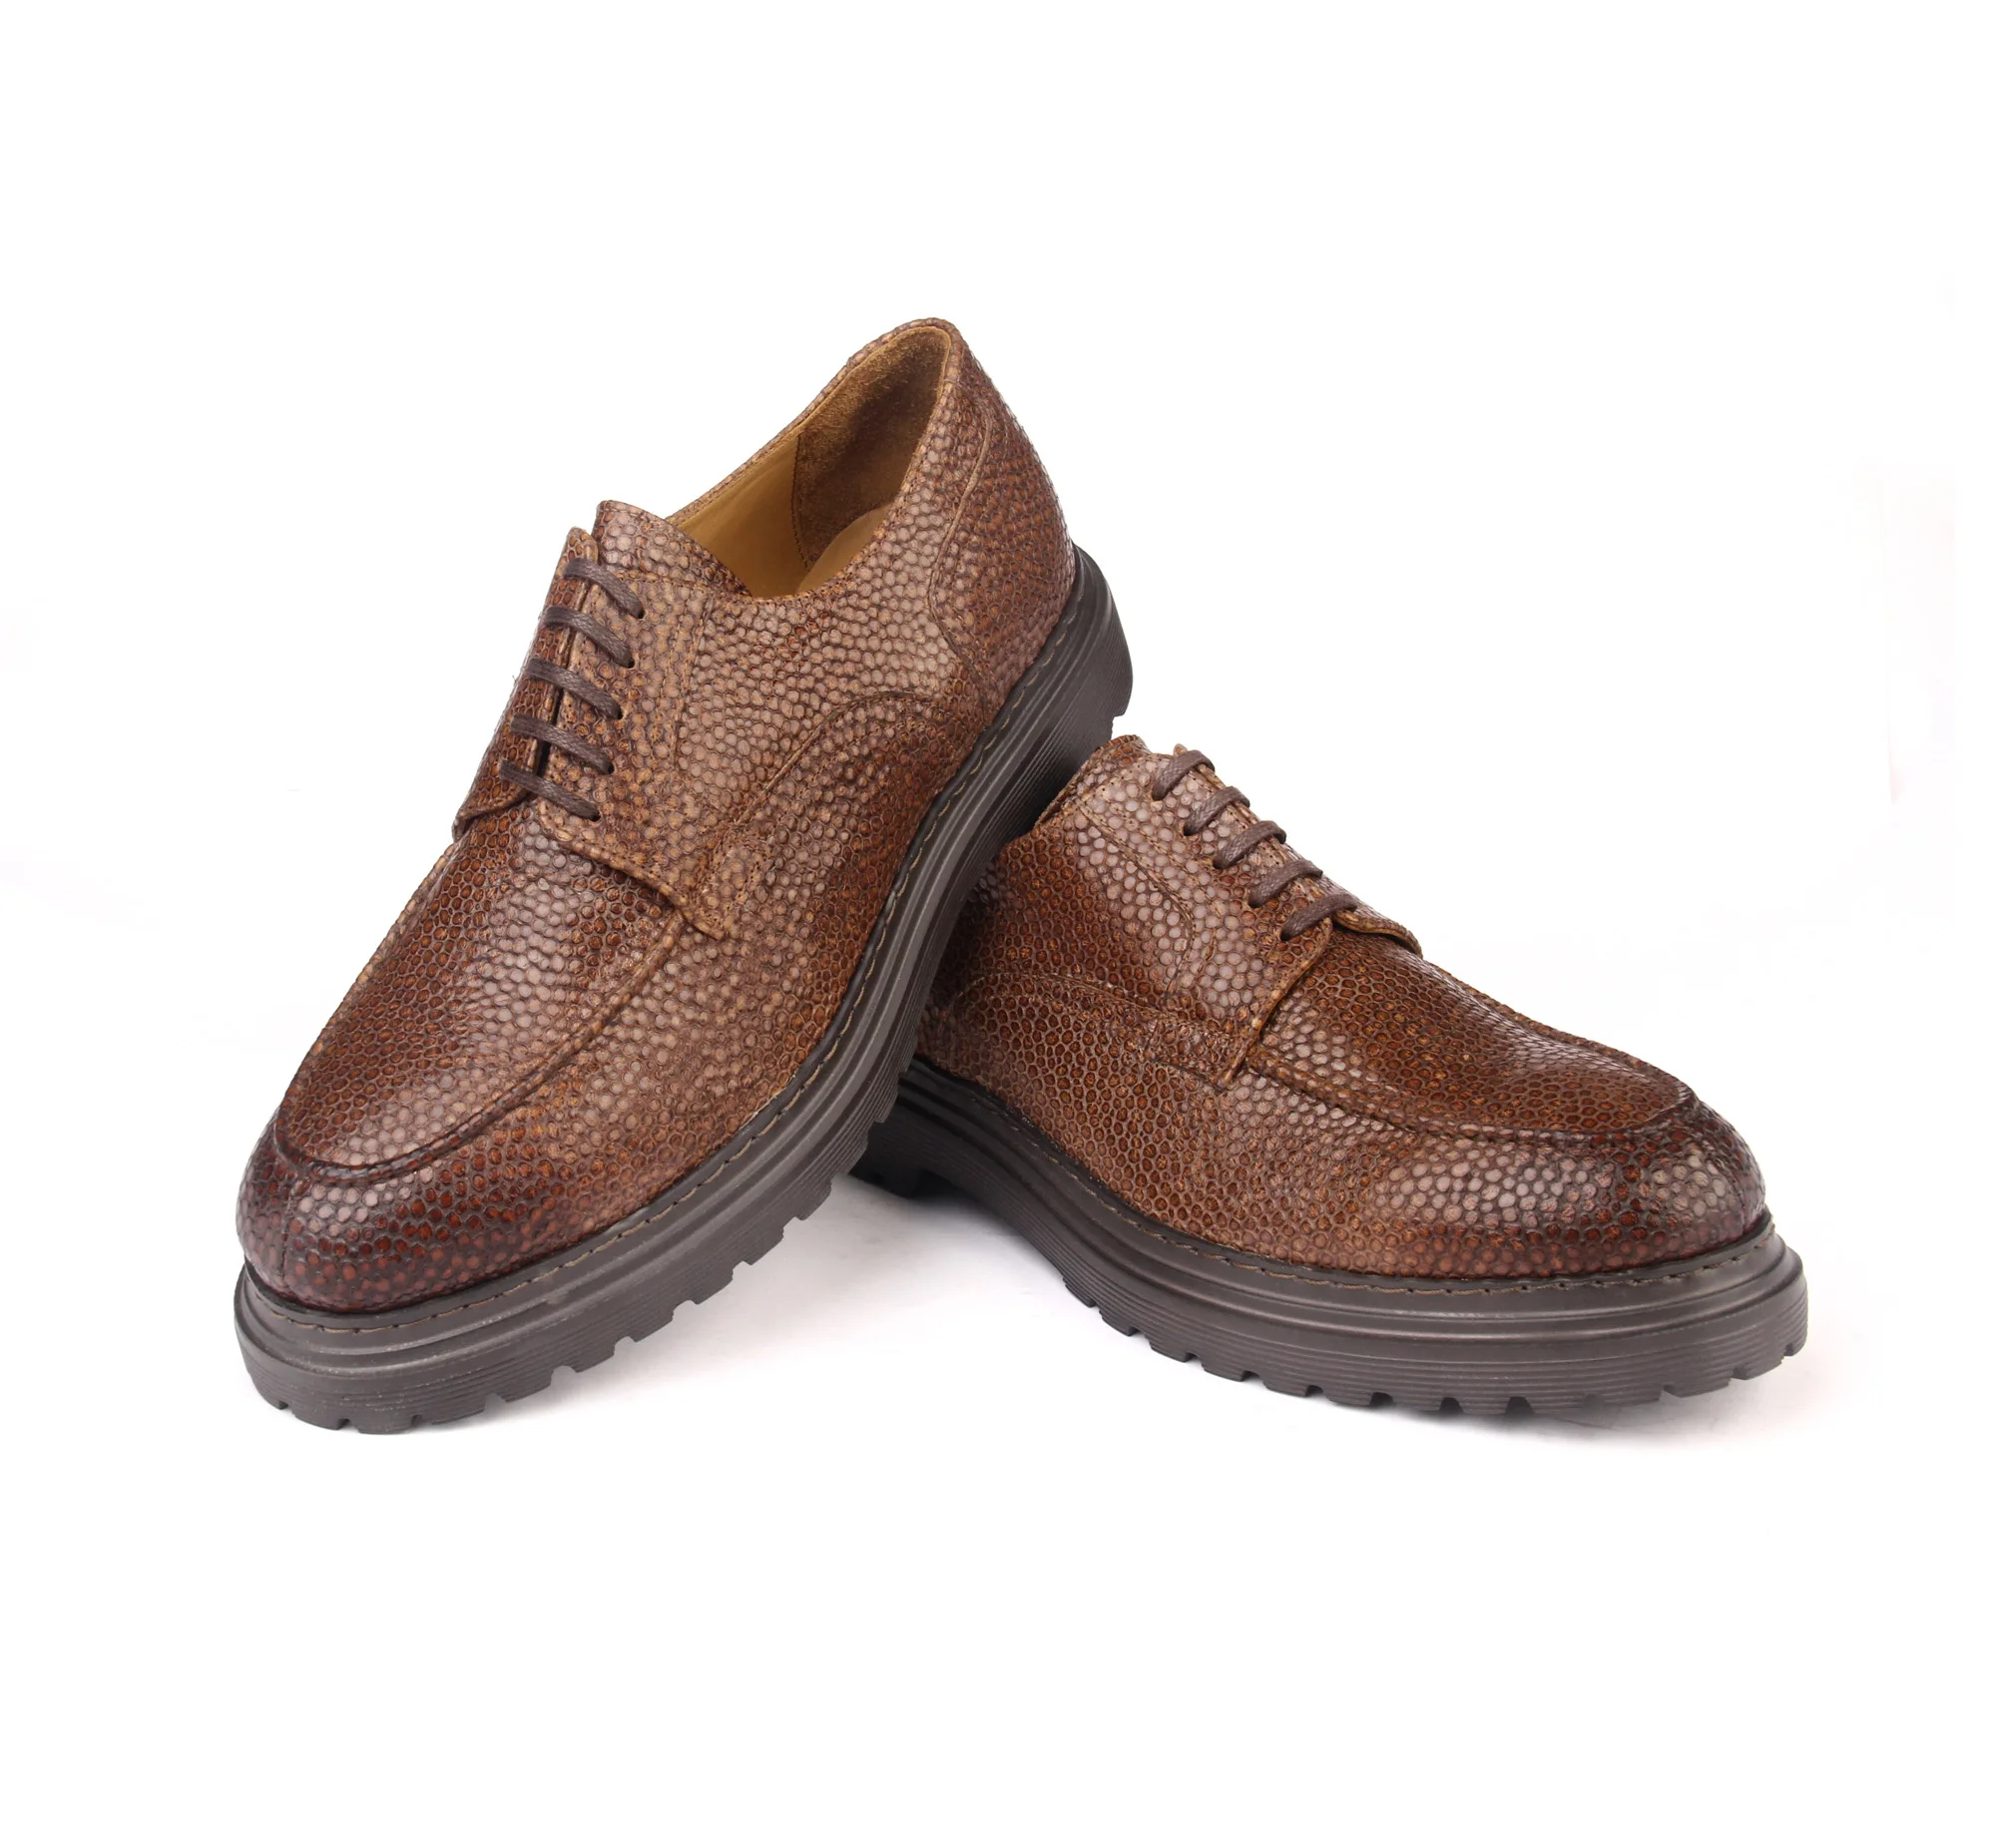 

Handmade Casual Derby Shoes with Stingray Patterned Calf Leather, Tobacco Light Brown, Height Increasing Lightweight EVA Sole